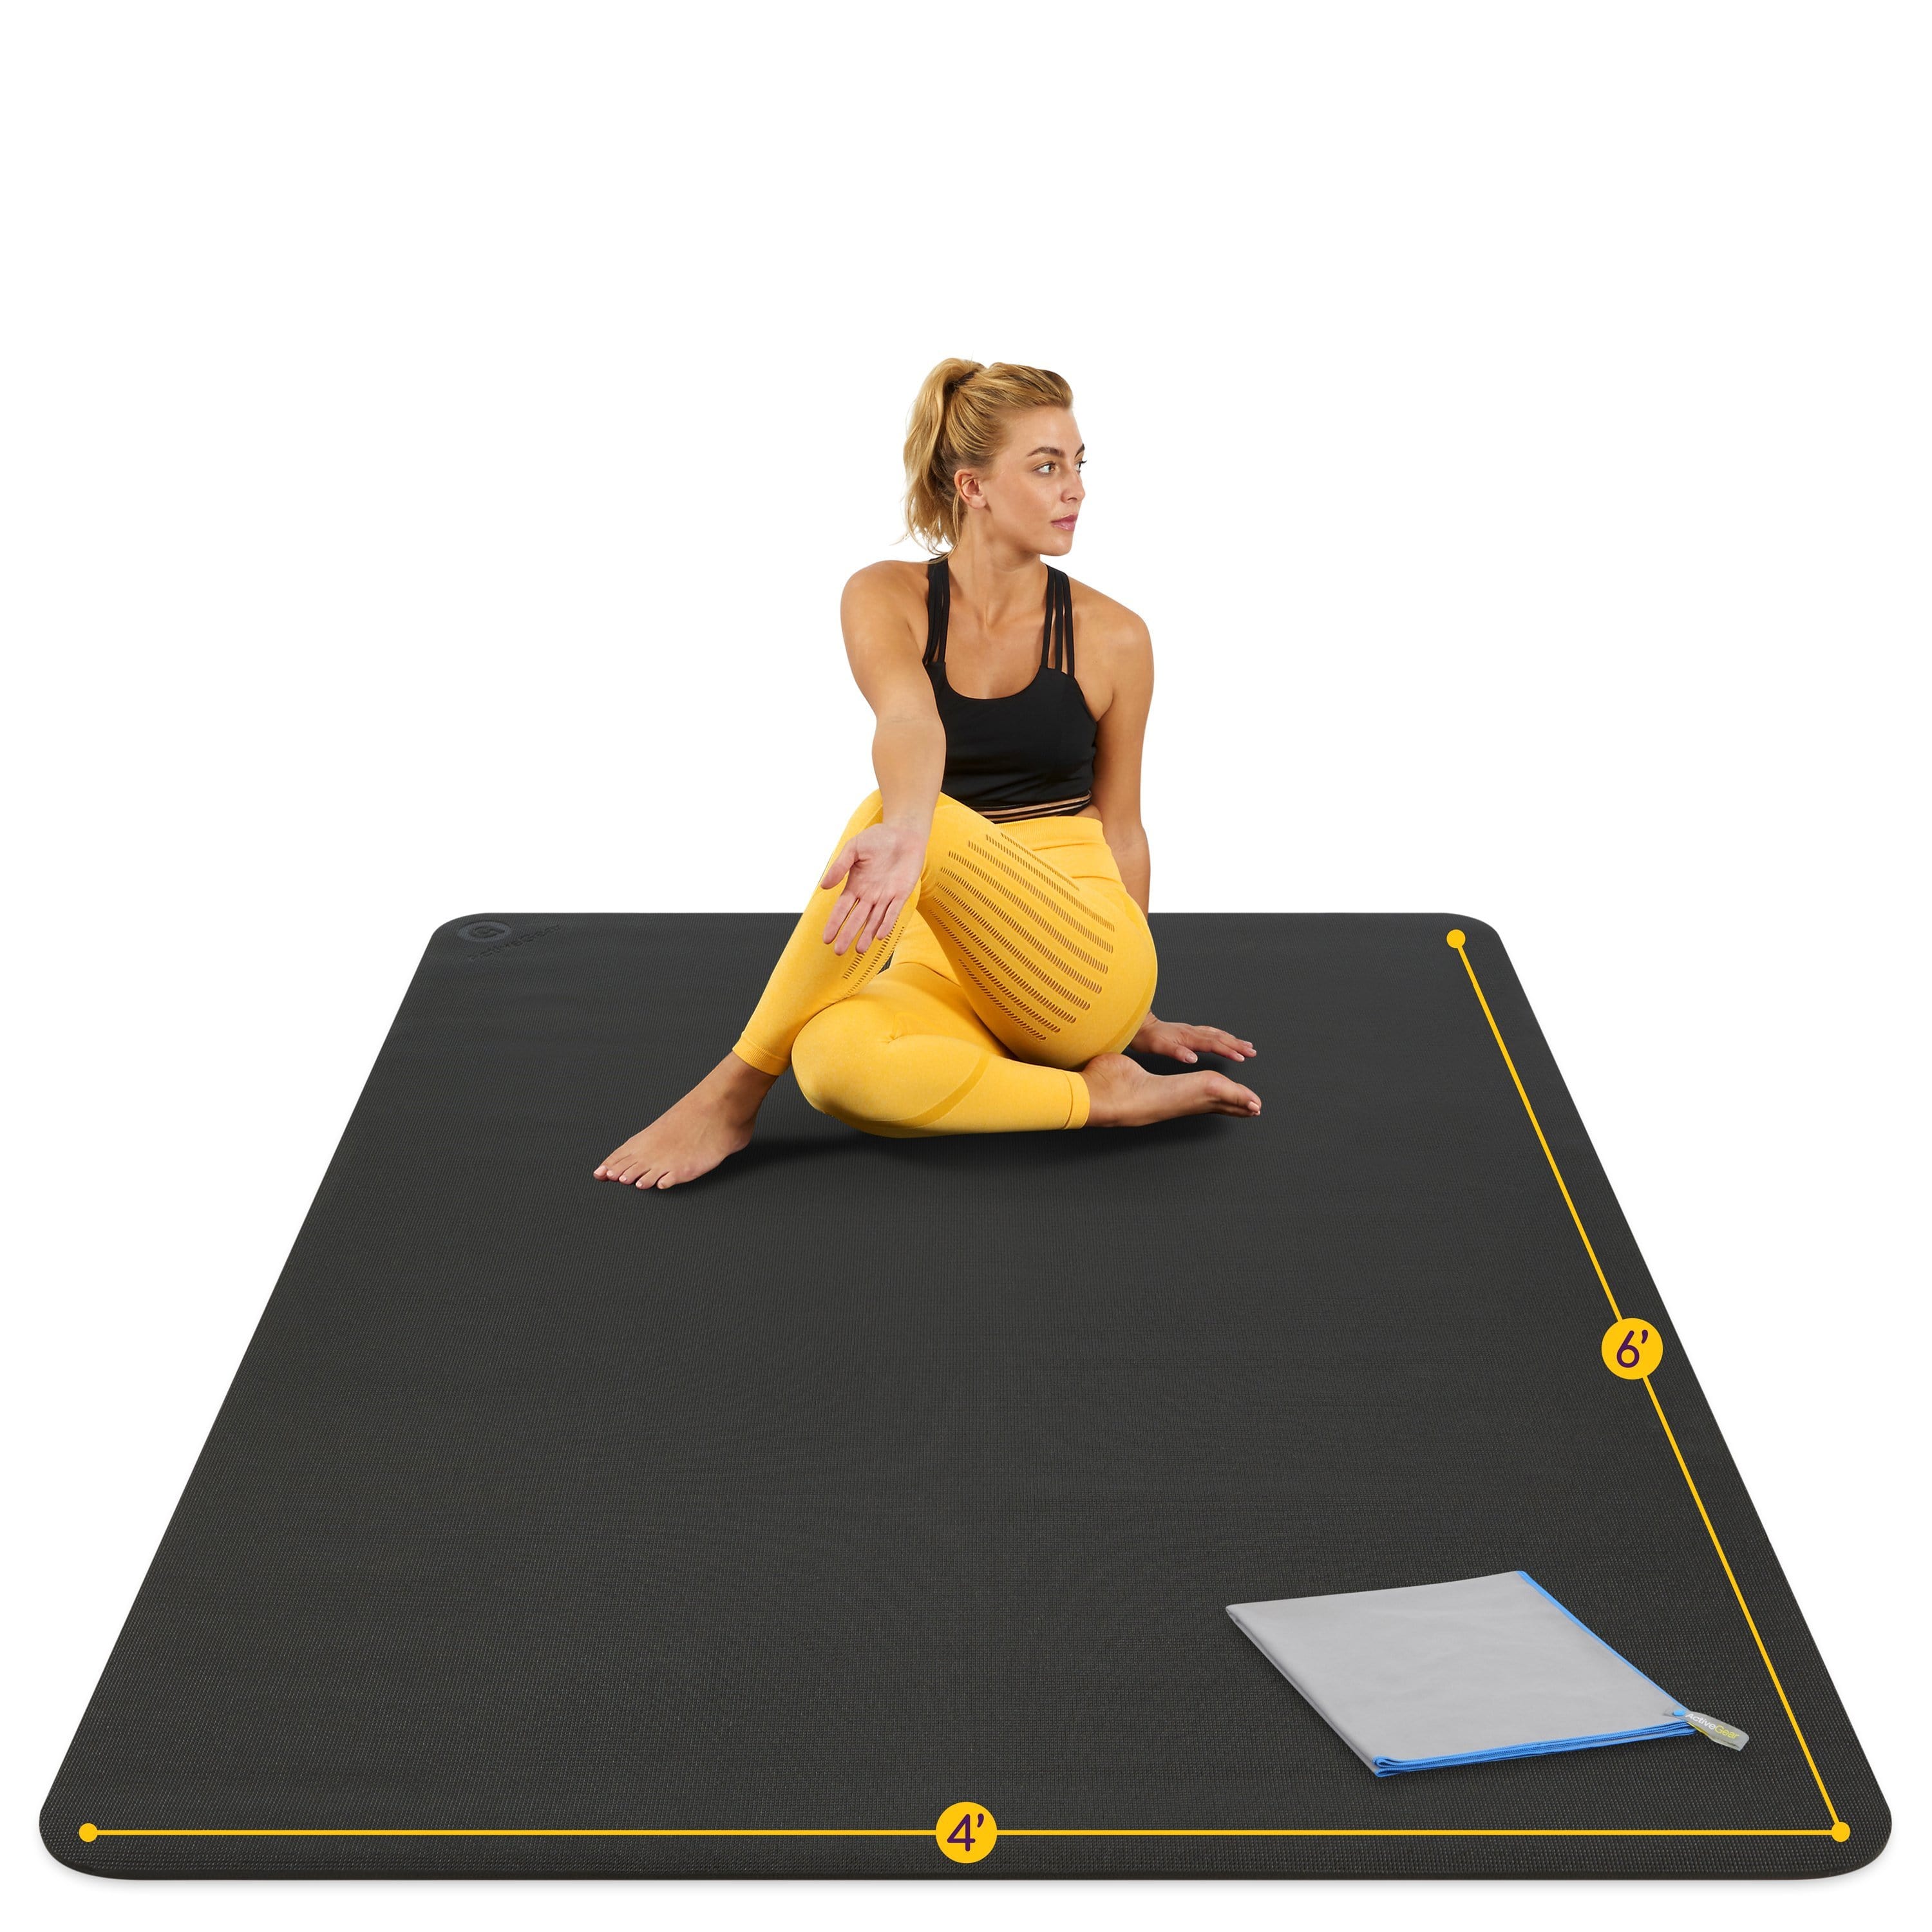 We Review the Large Yoga Mat and Exercise Mat from Gorilla Mats (Video)